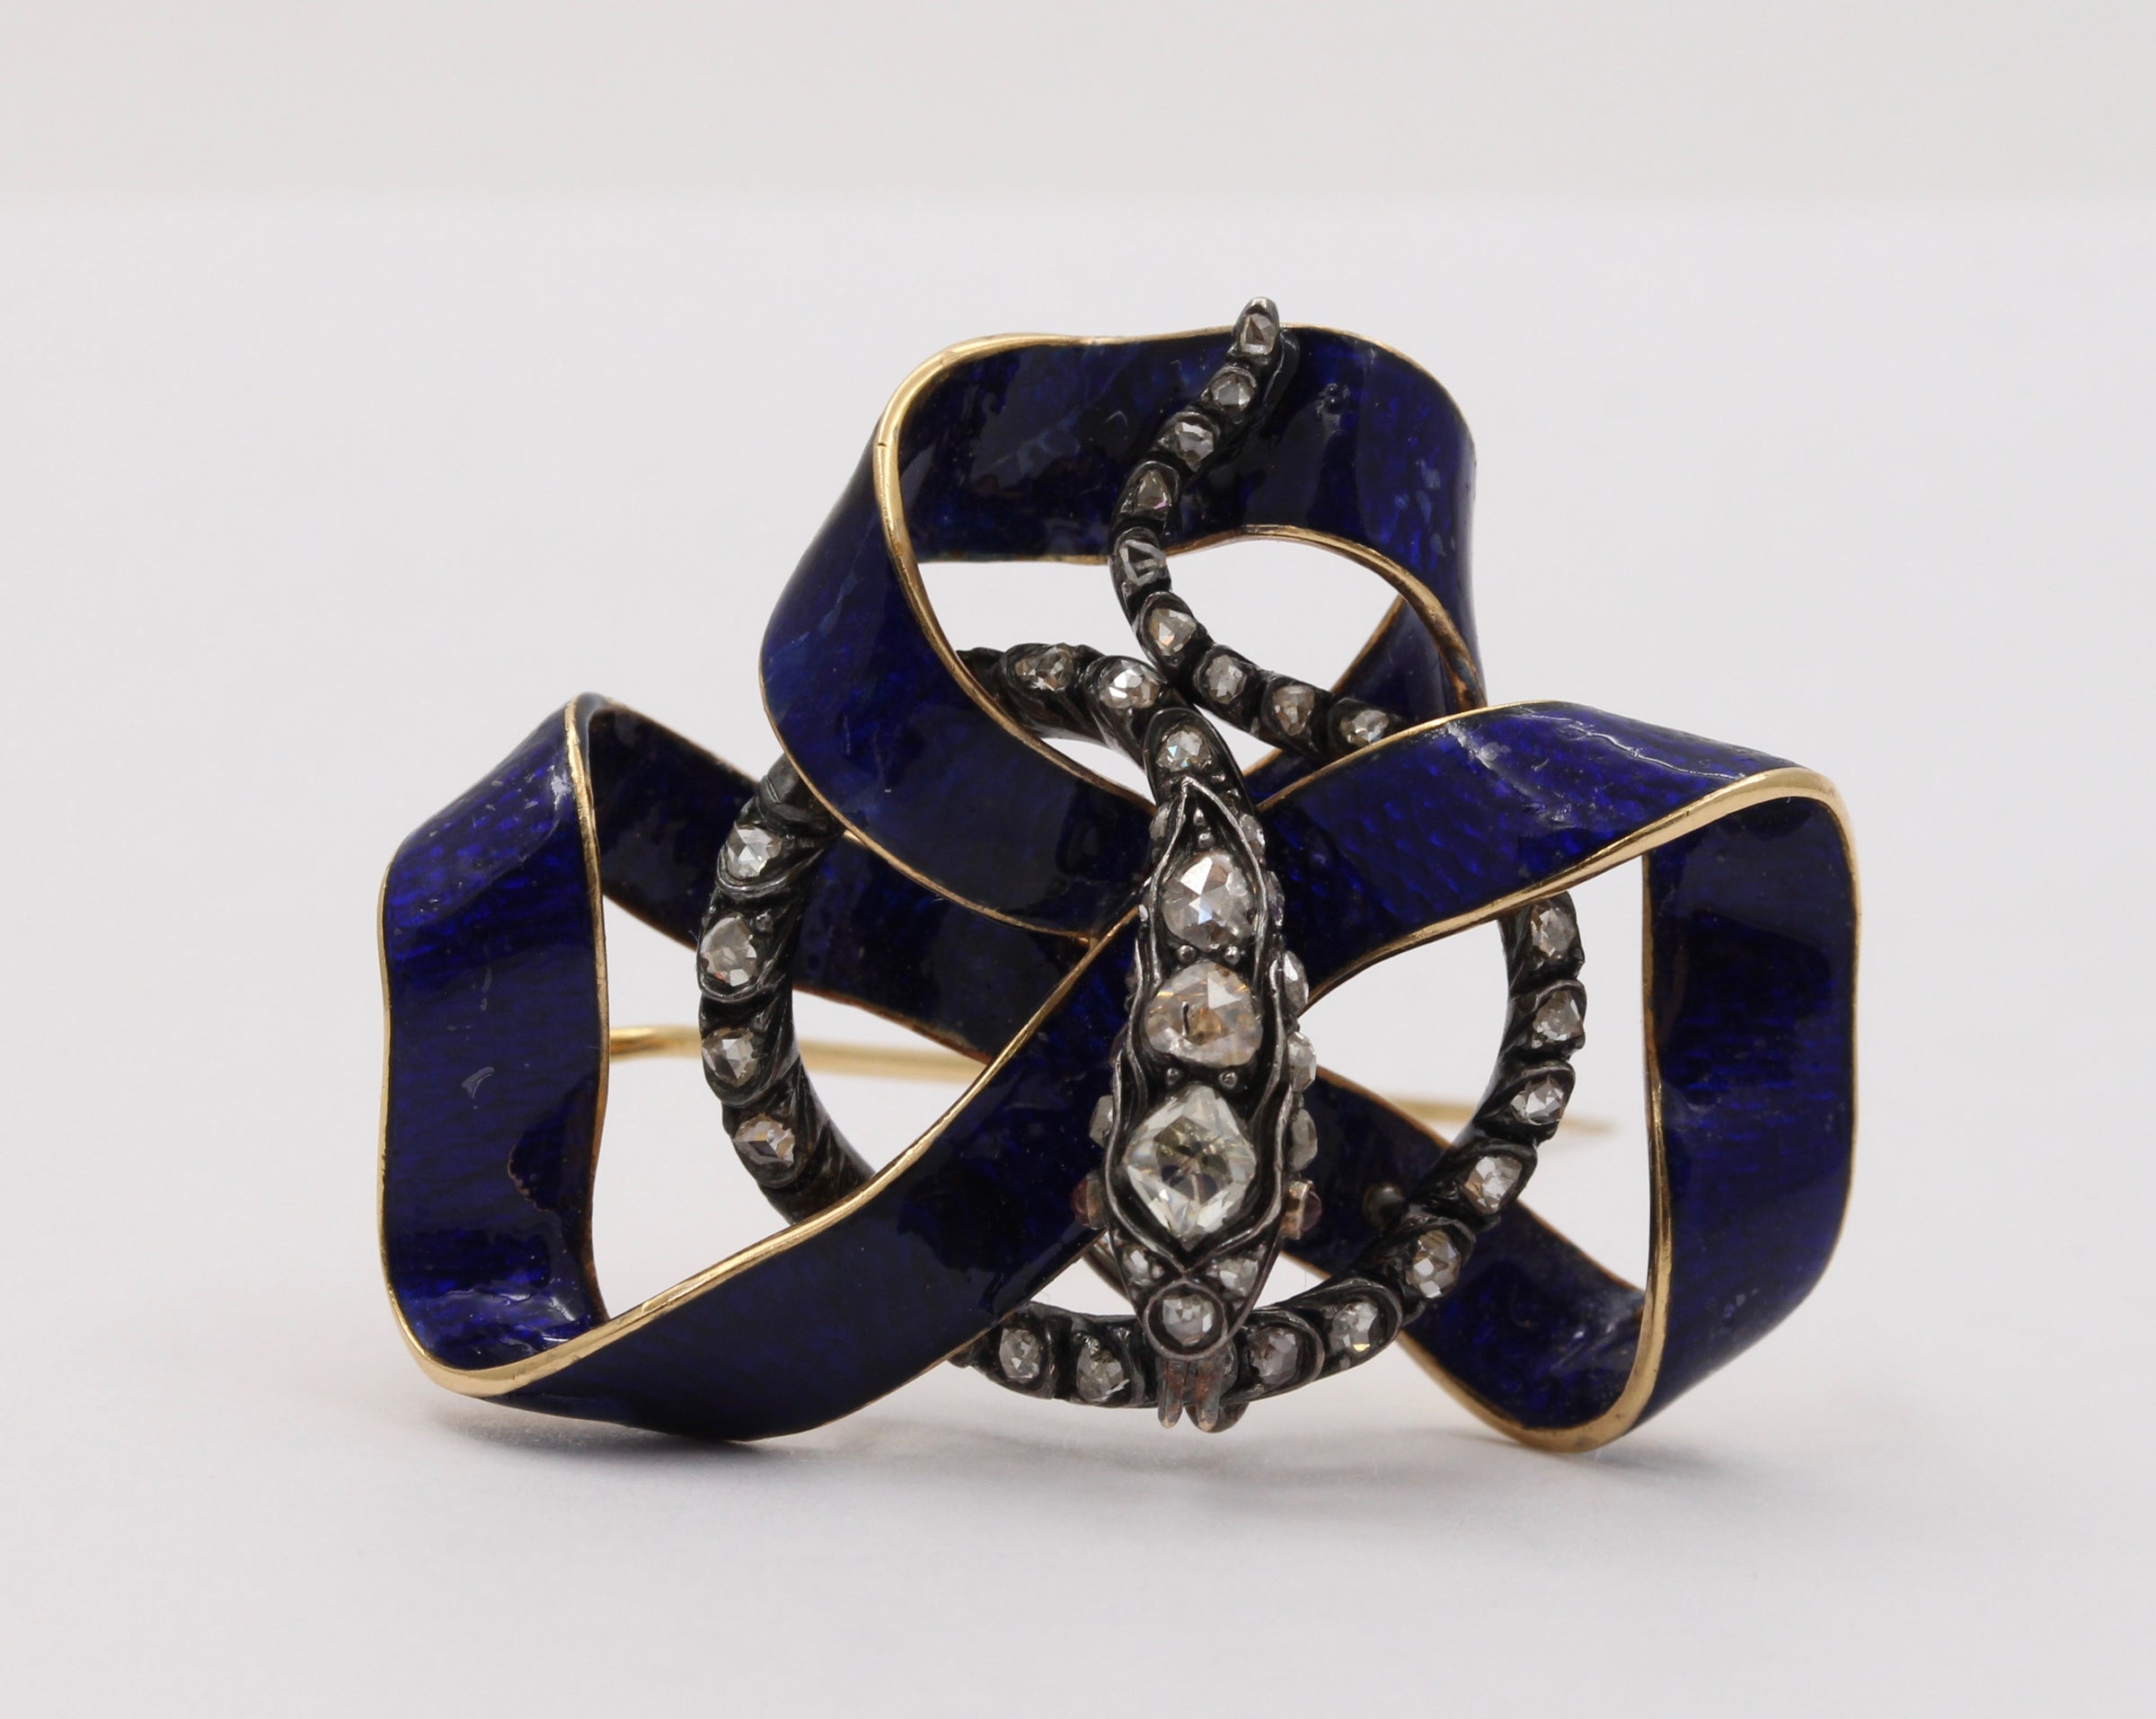 Antique Diamond and Blue Enamel Bow Brooch with DogClip for Charms